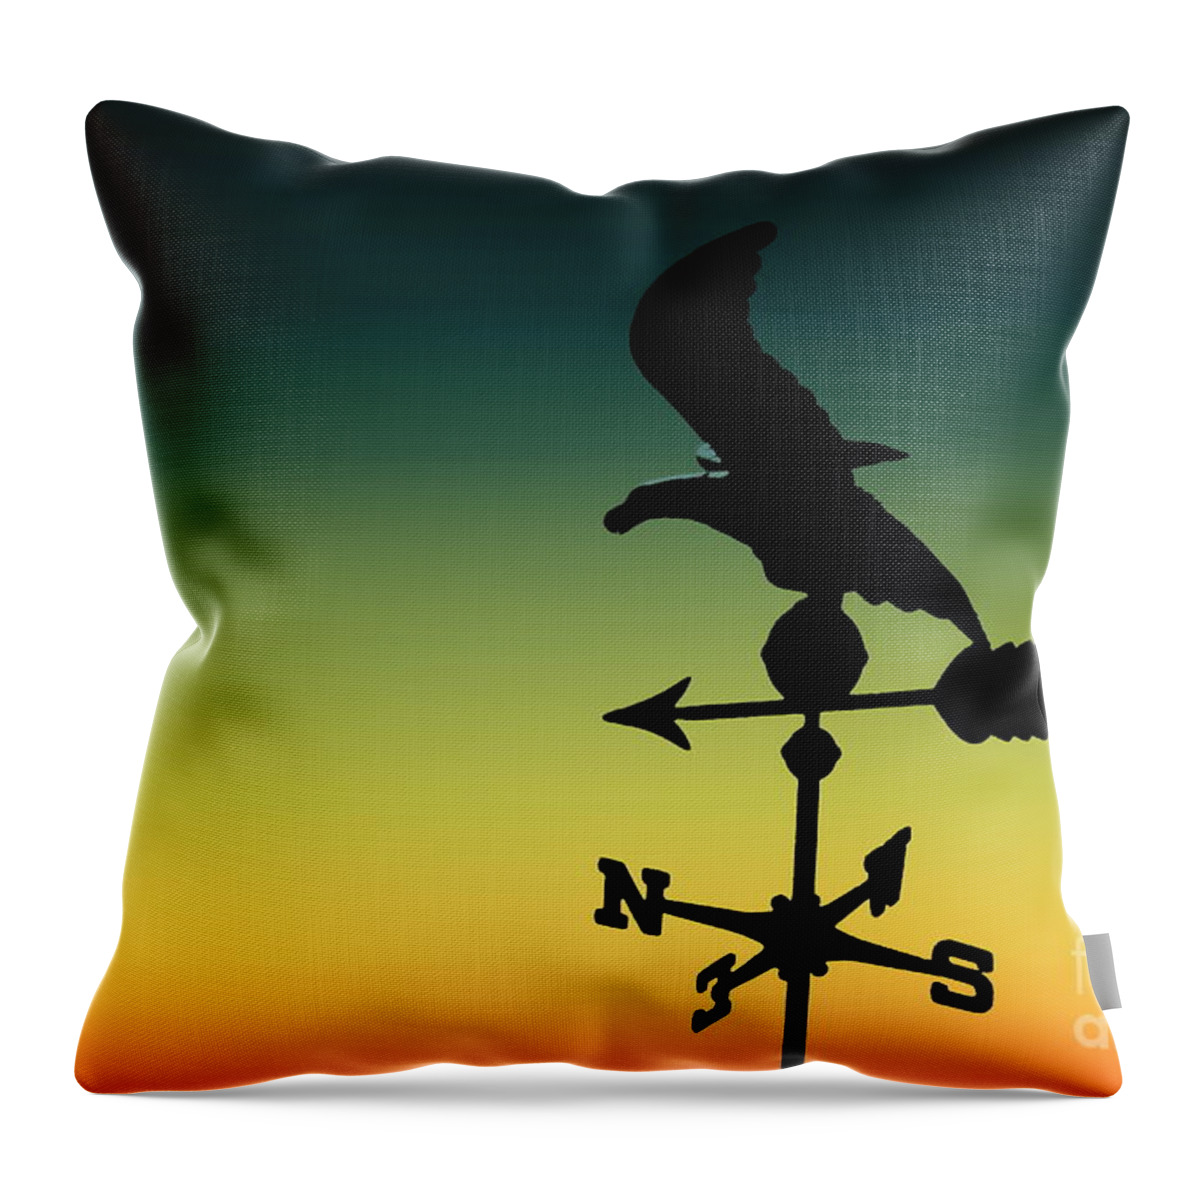 North Throw Pillow featuring the photograph Due North Silhouette On The Dusk Sky by Colleen Cornelius